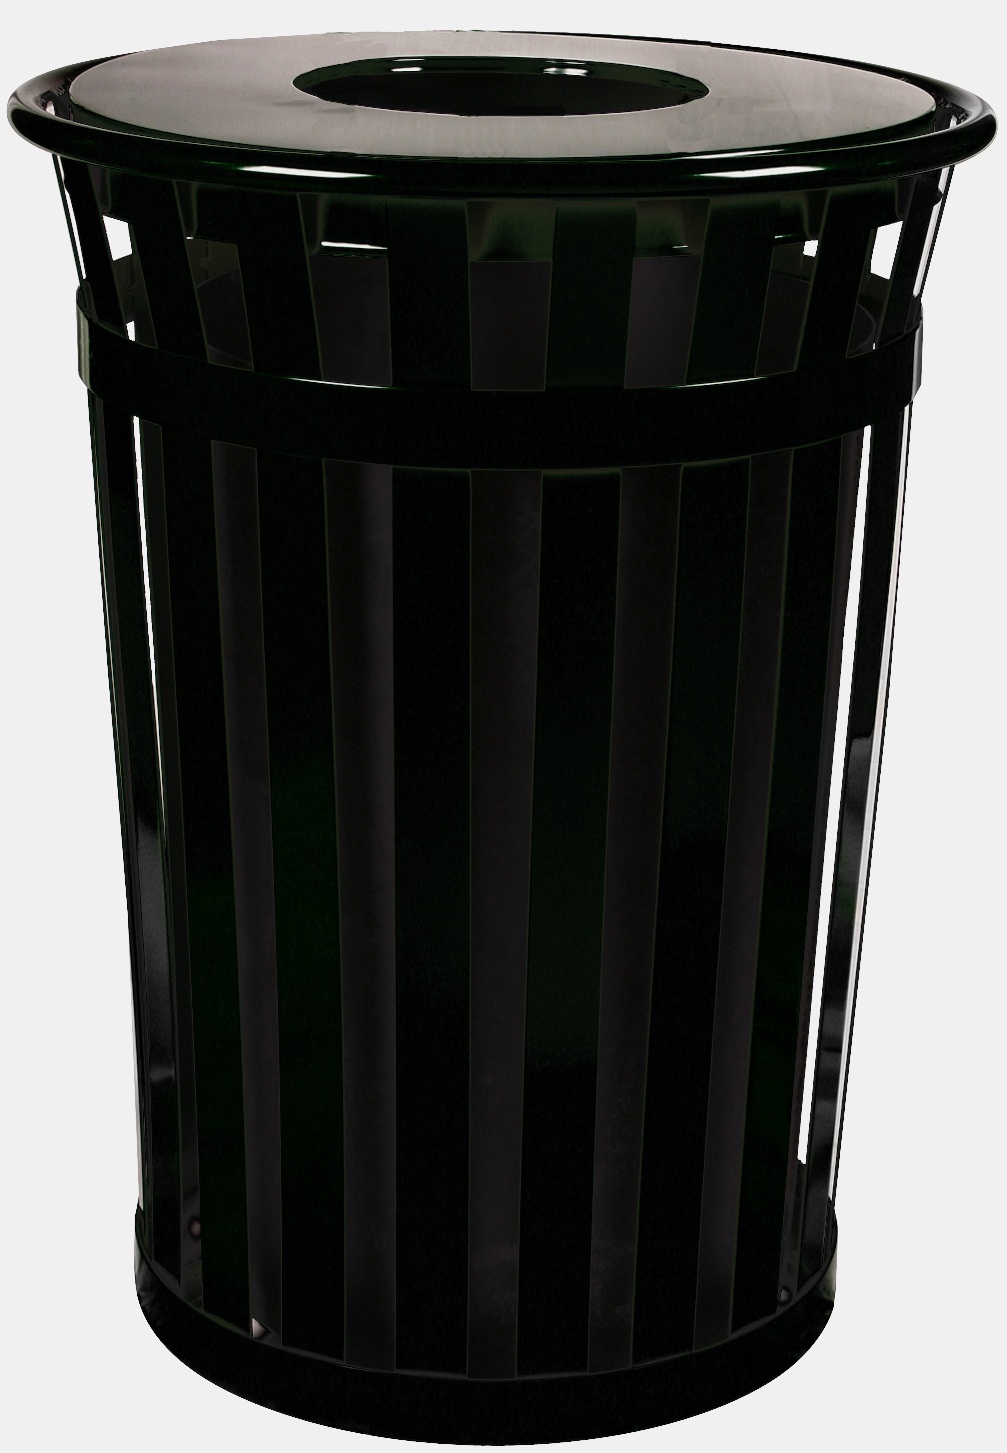 Trash receptacle with flat top, Outdoor